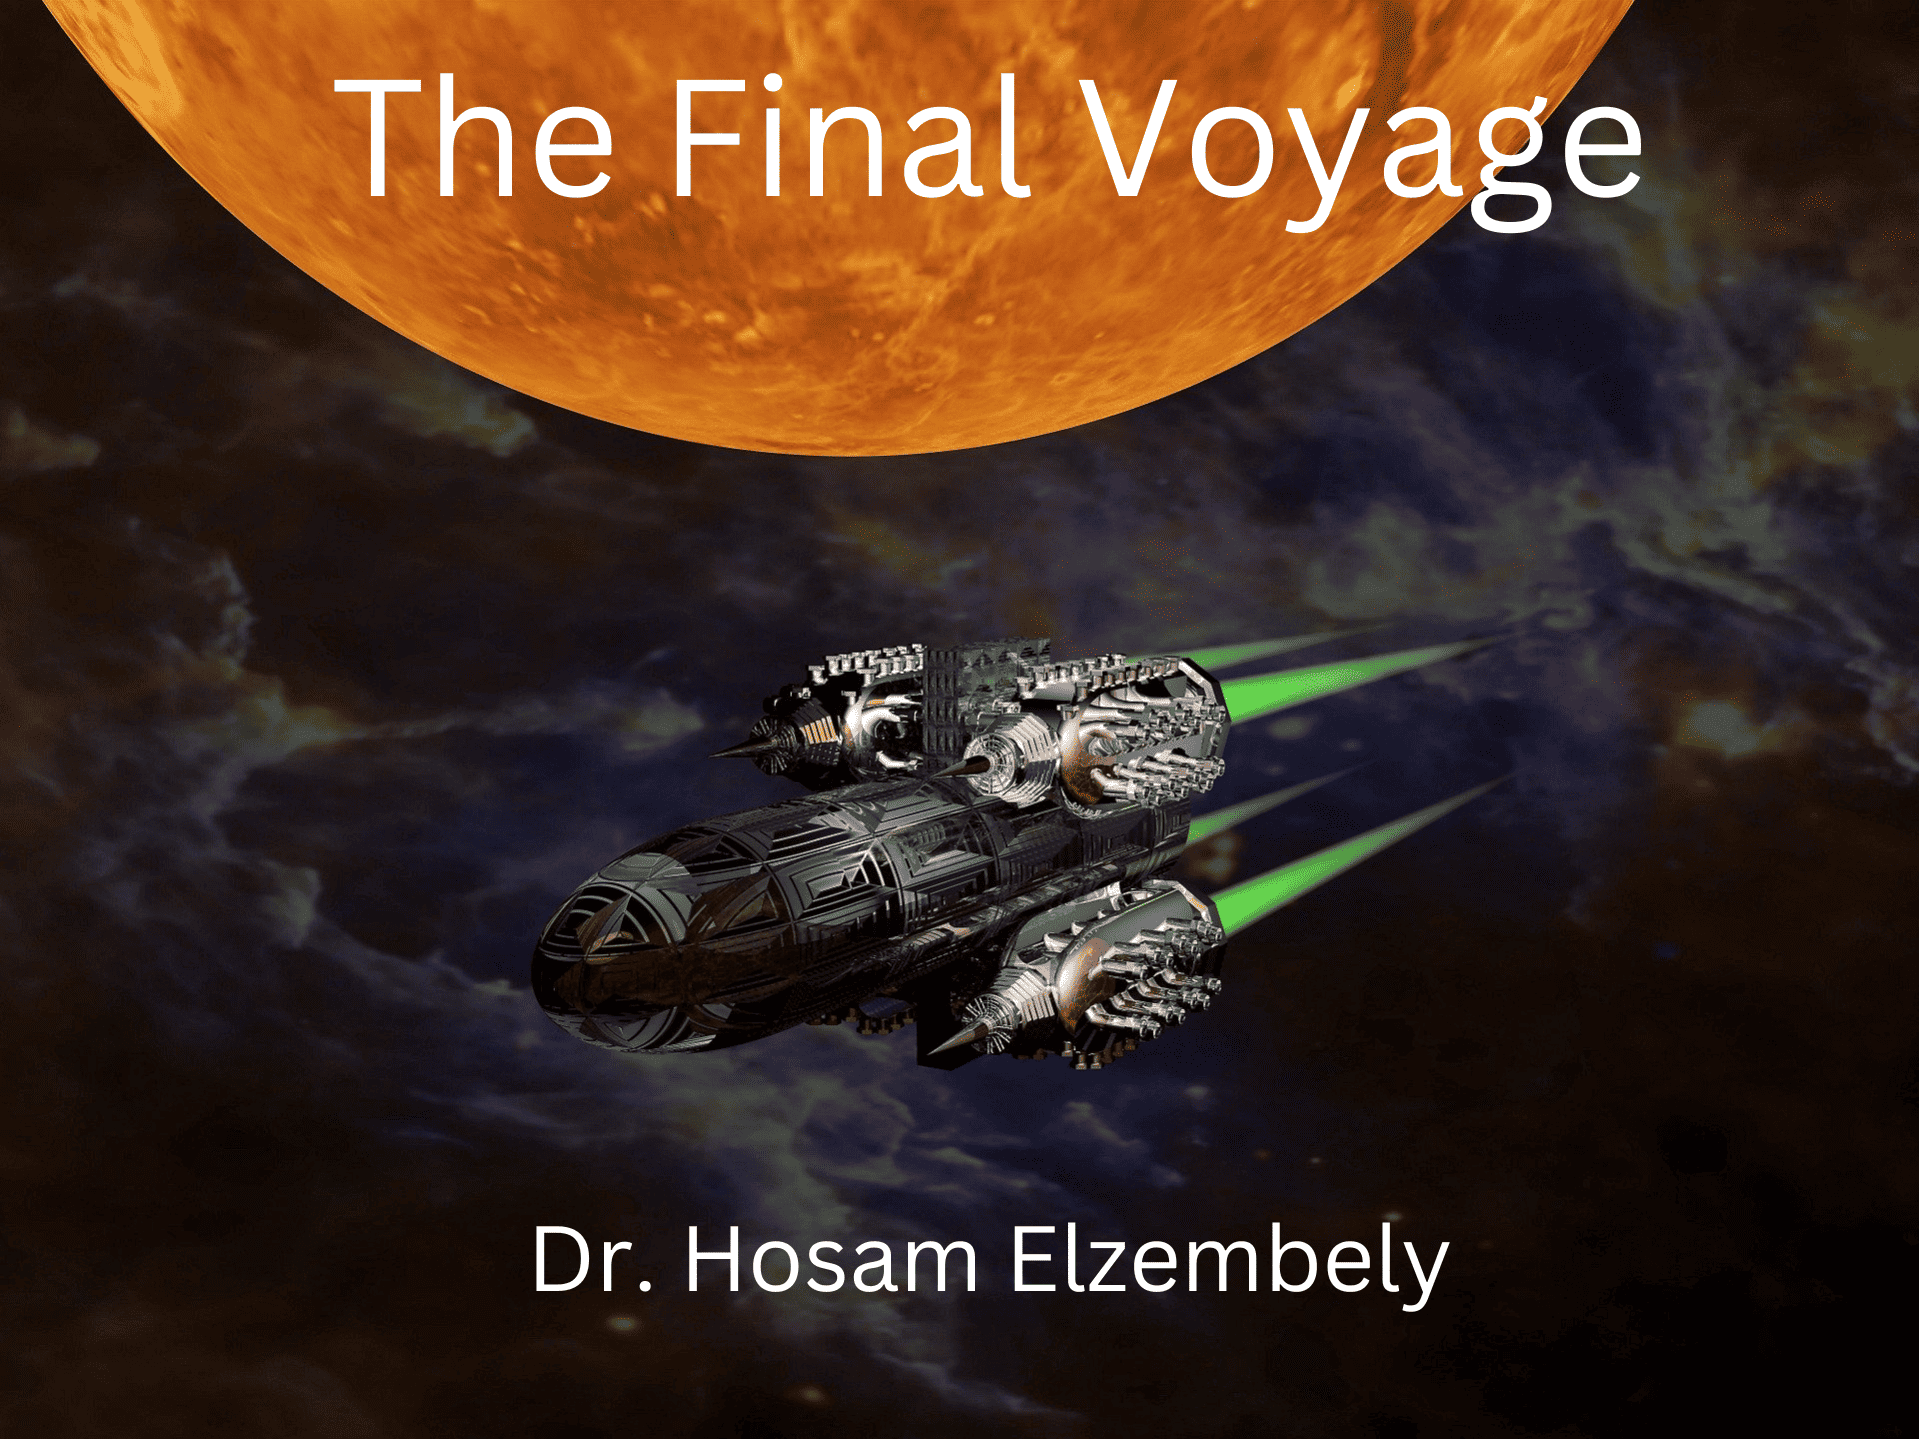 Image of mars at the top with a space craft flying by. the title has Dr. Hosam Elzembely as author with the title Final Voyage